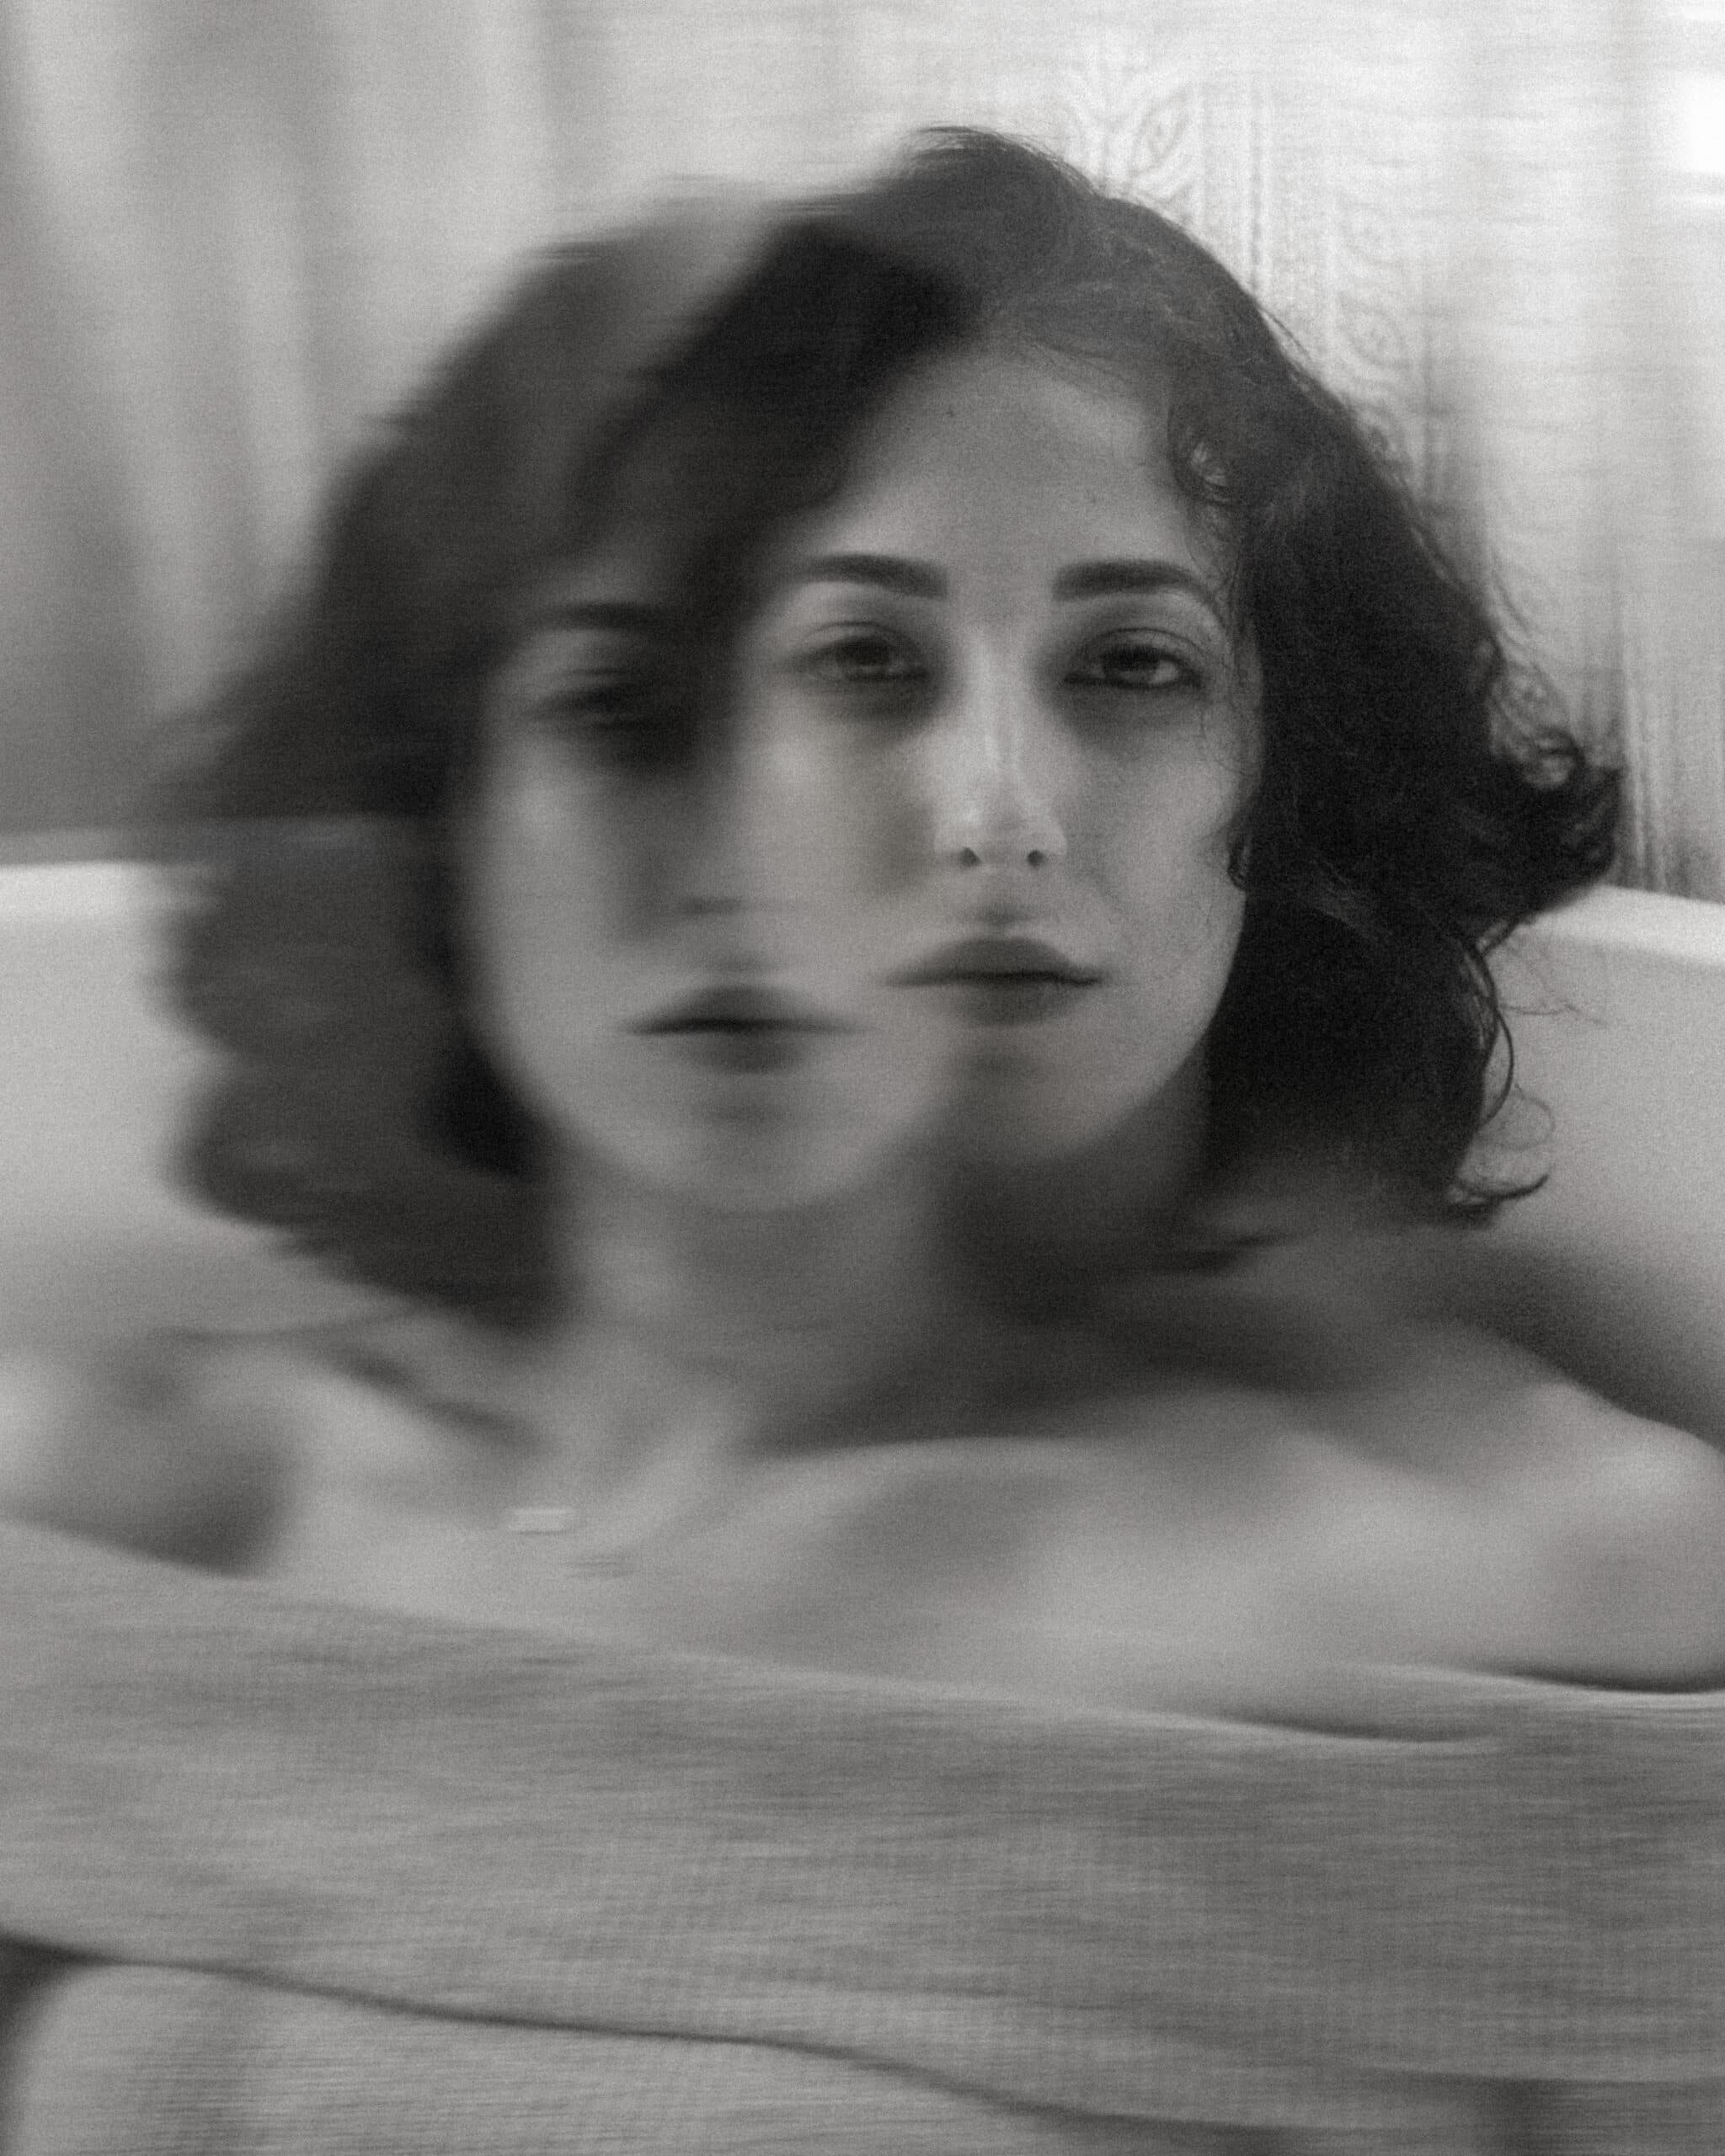 creative expression through echos of a blurry photo of a woman 